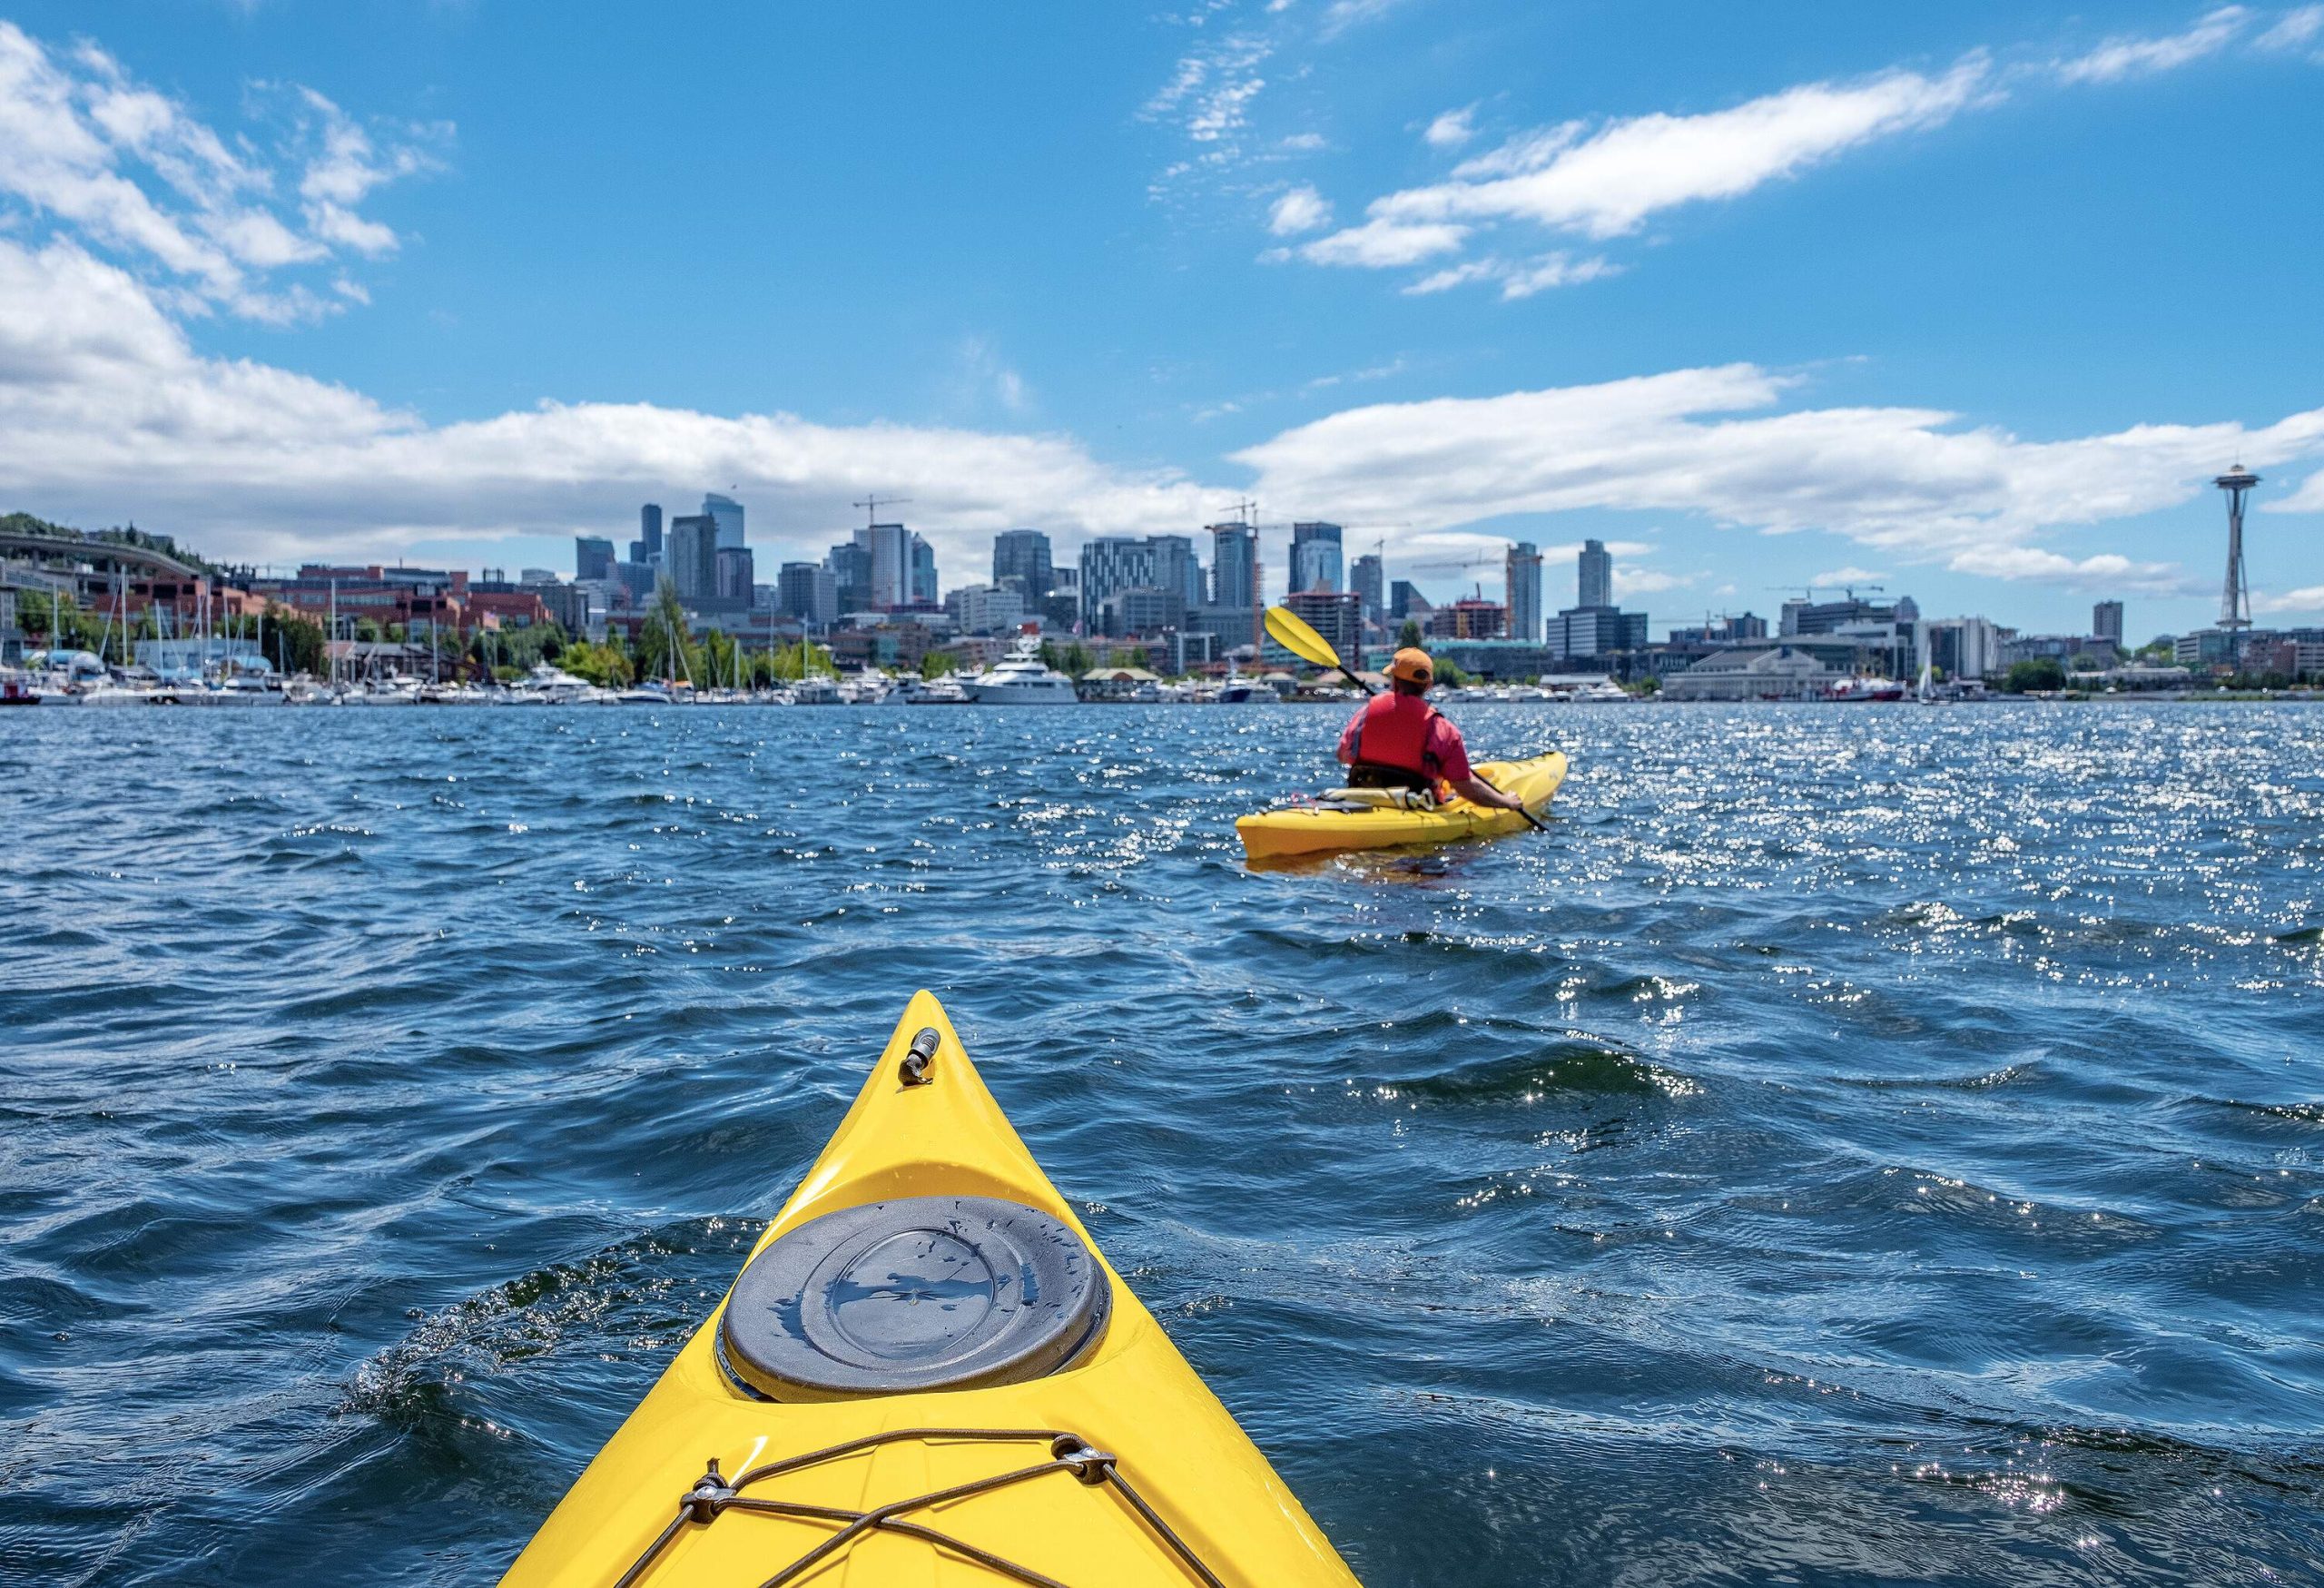 People on yellow kayak boats paddle in the shimmering lake with a view of urban cityscape against the blue sky.